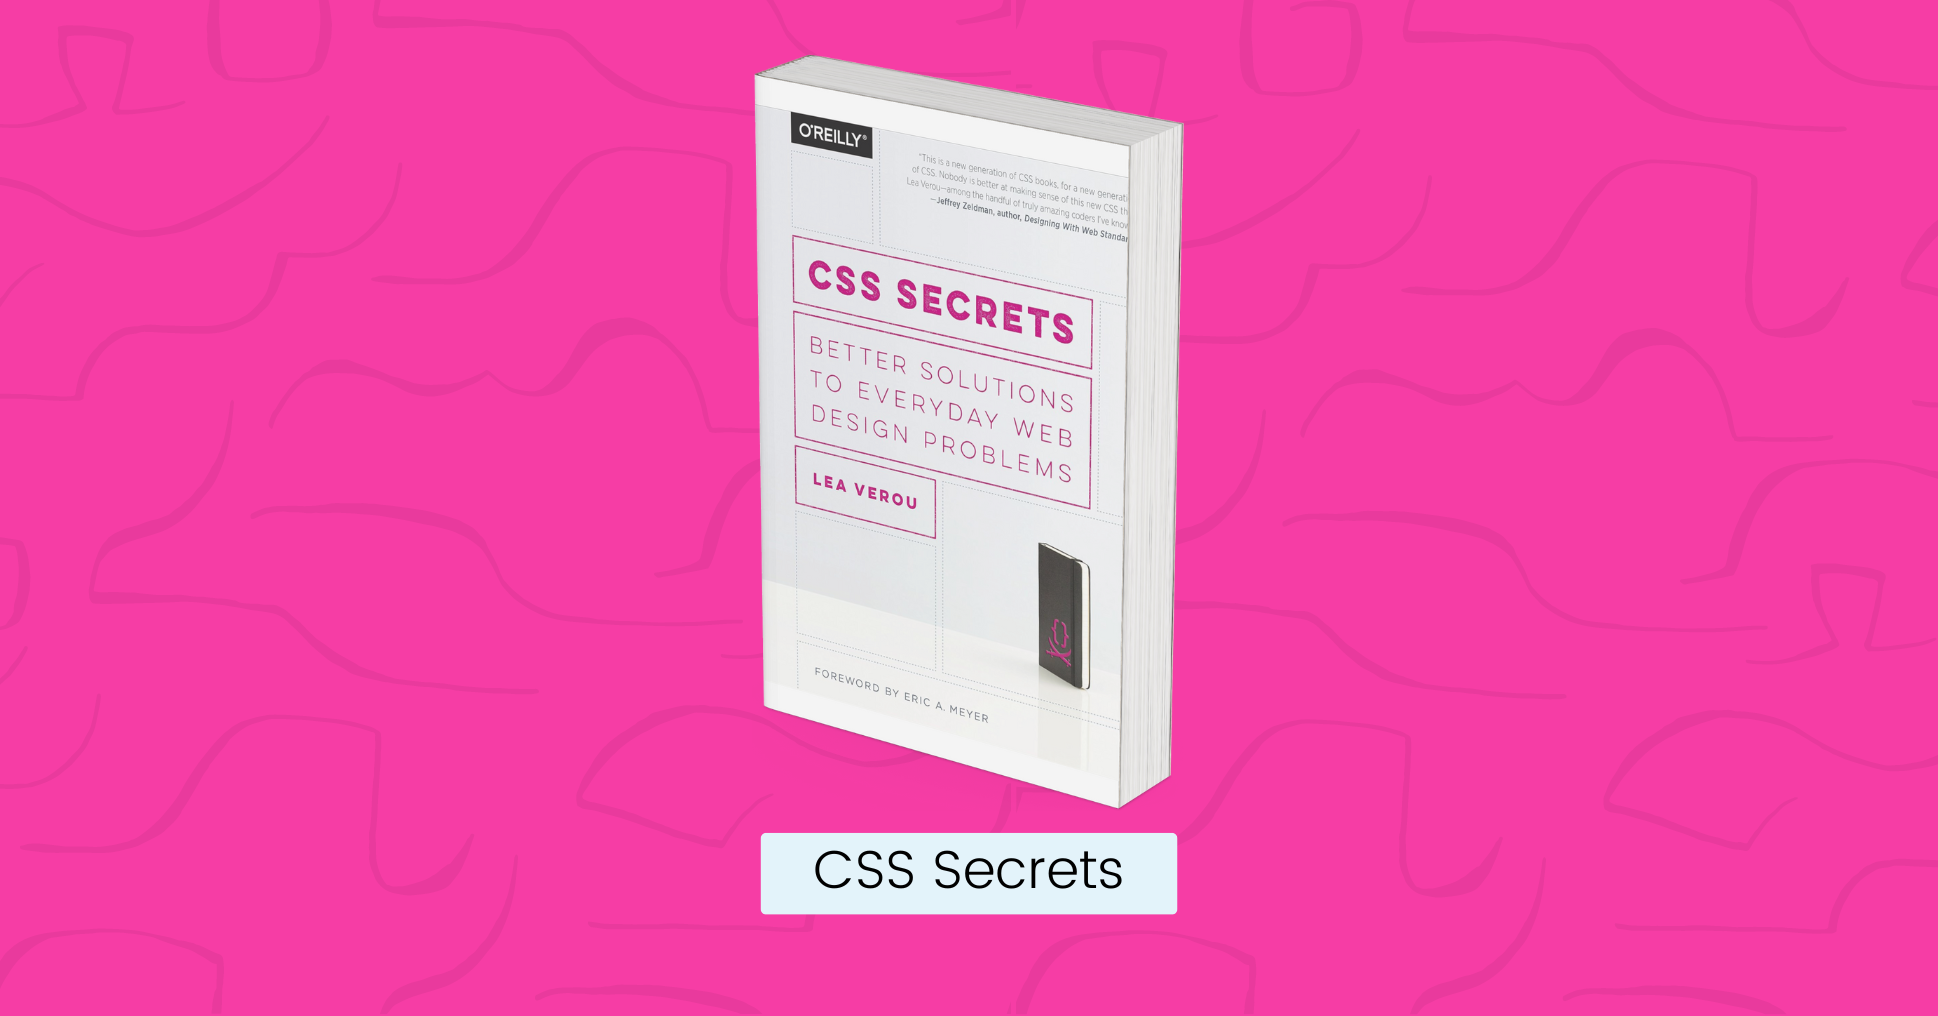 Cover of the Book: CSS Secrets Better Solutions to Everyday Web Design Problems